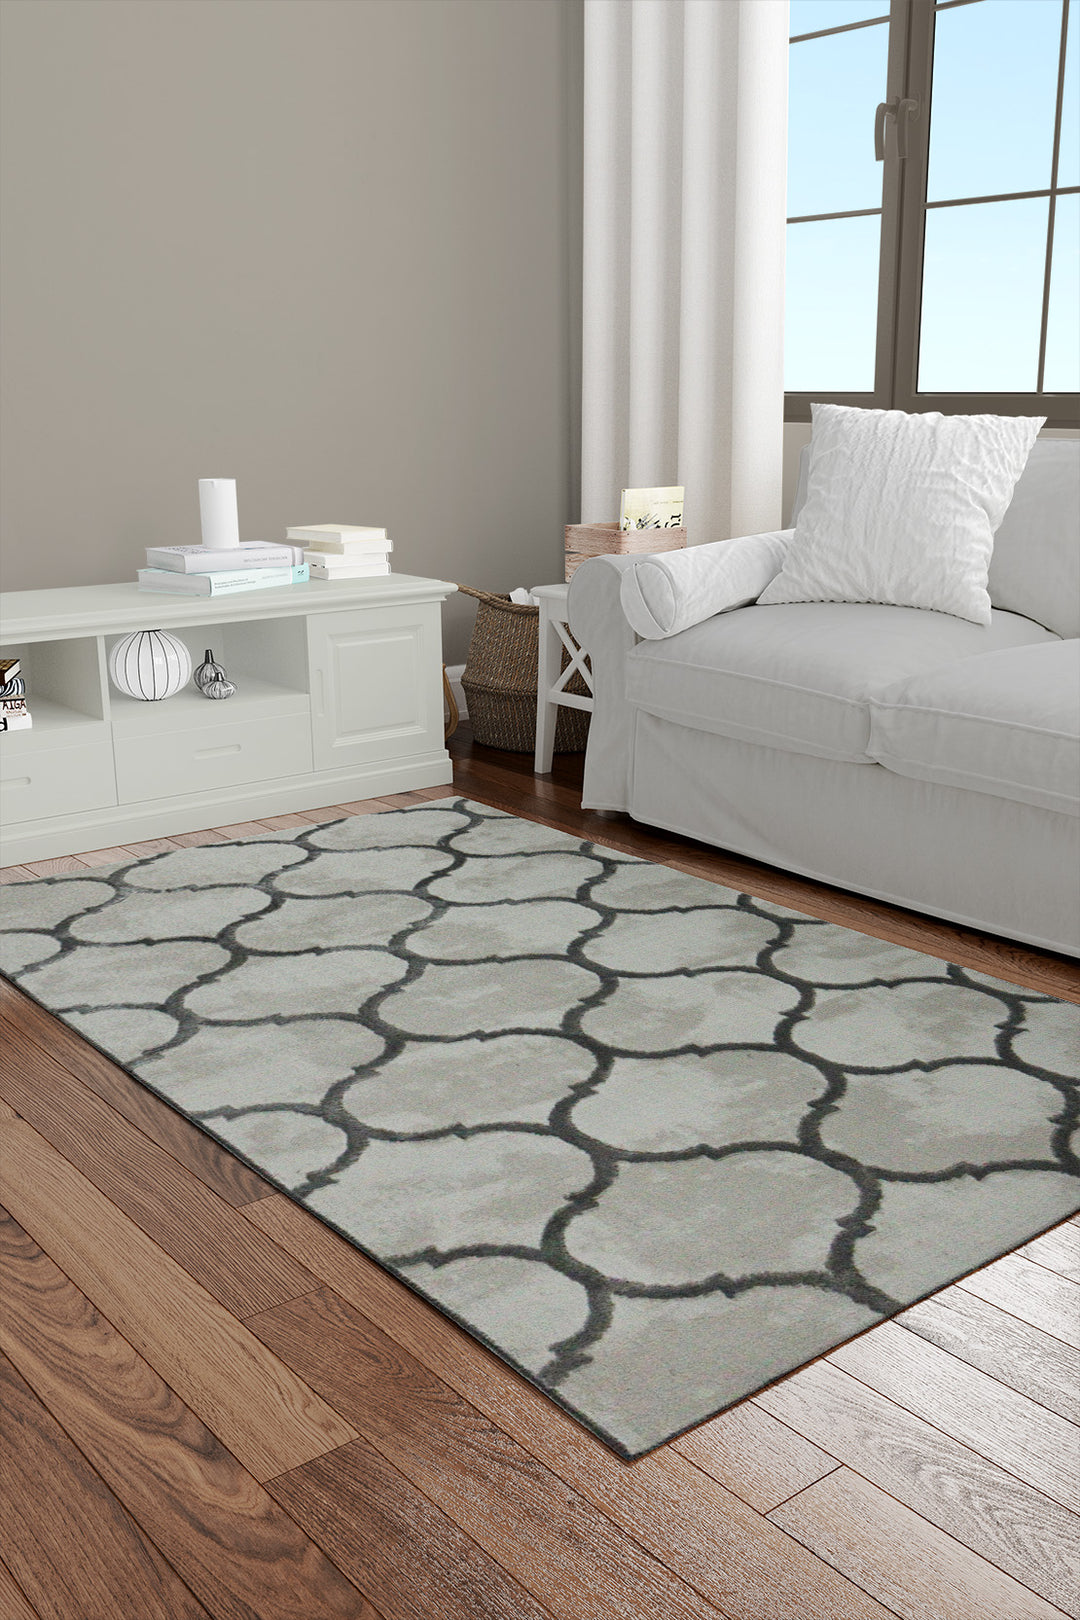 Turkish Modern  Festival 1 Rug - Beige & Gray - 2.6 x 4.9 FT - Superior Comfort, Modern Style Accent Rugs